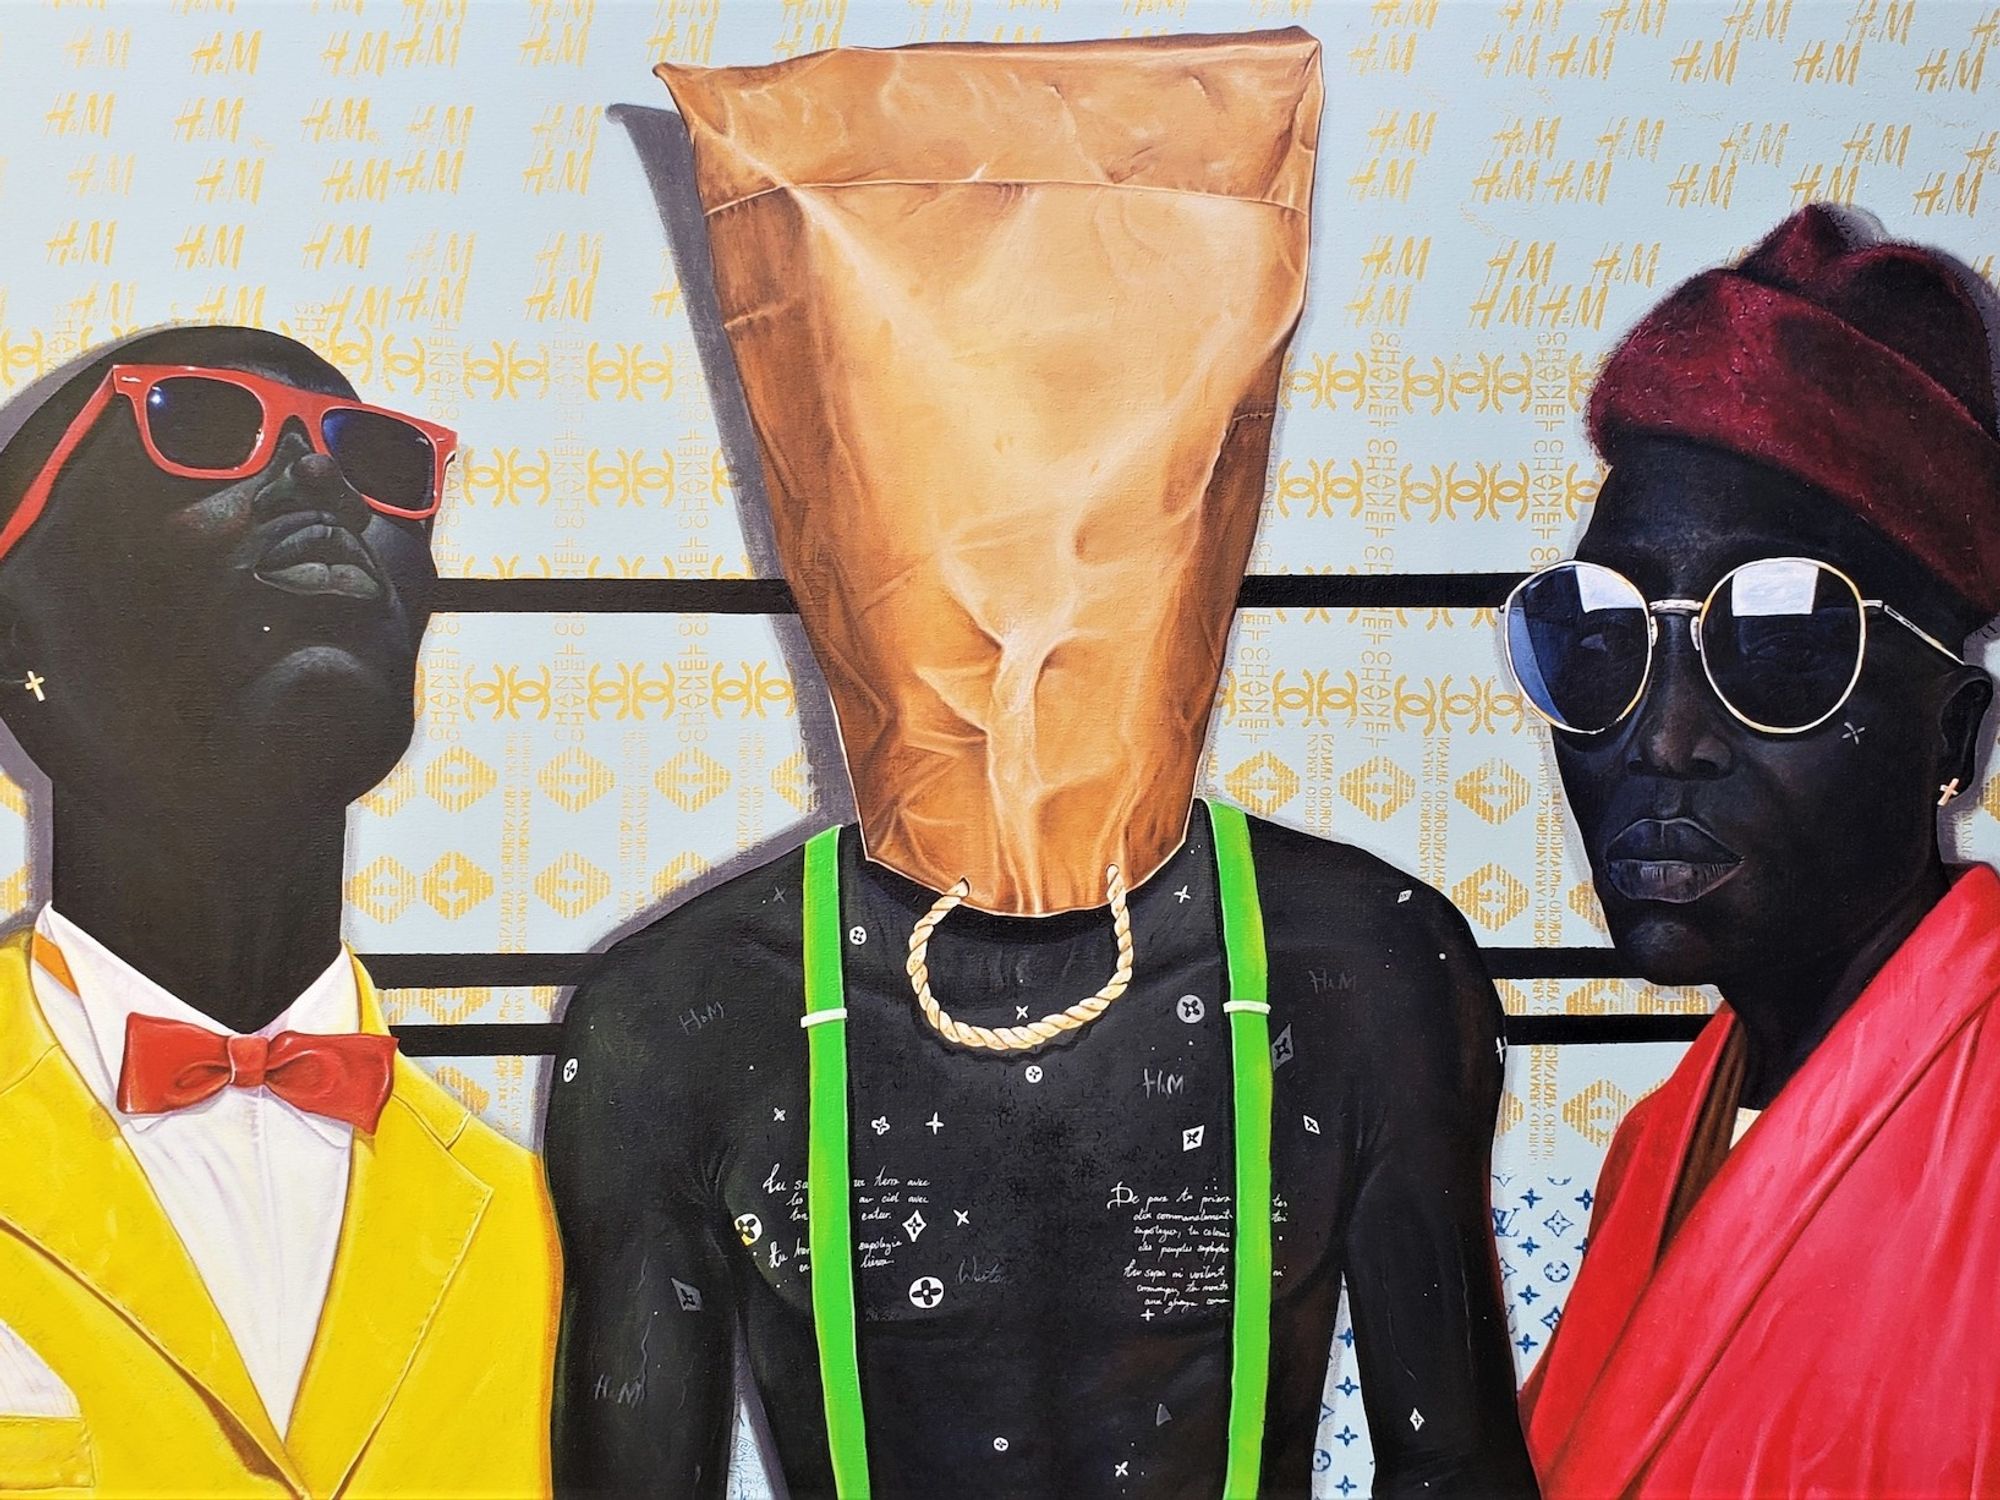 A colorful painting by a Cameroonian artist of three young men.